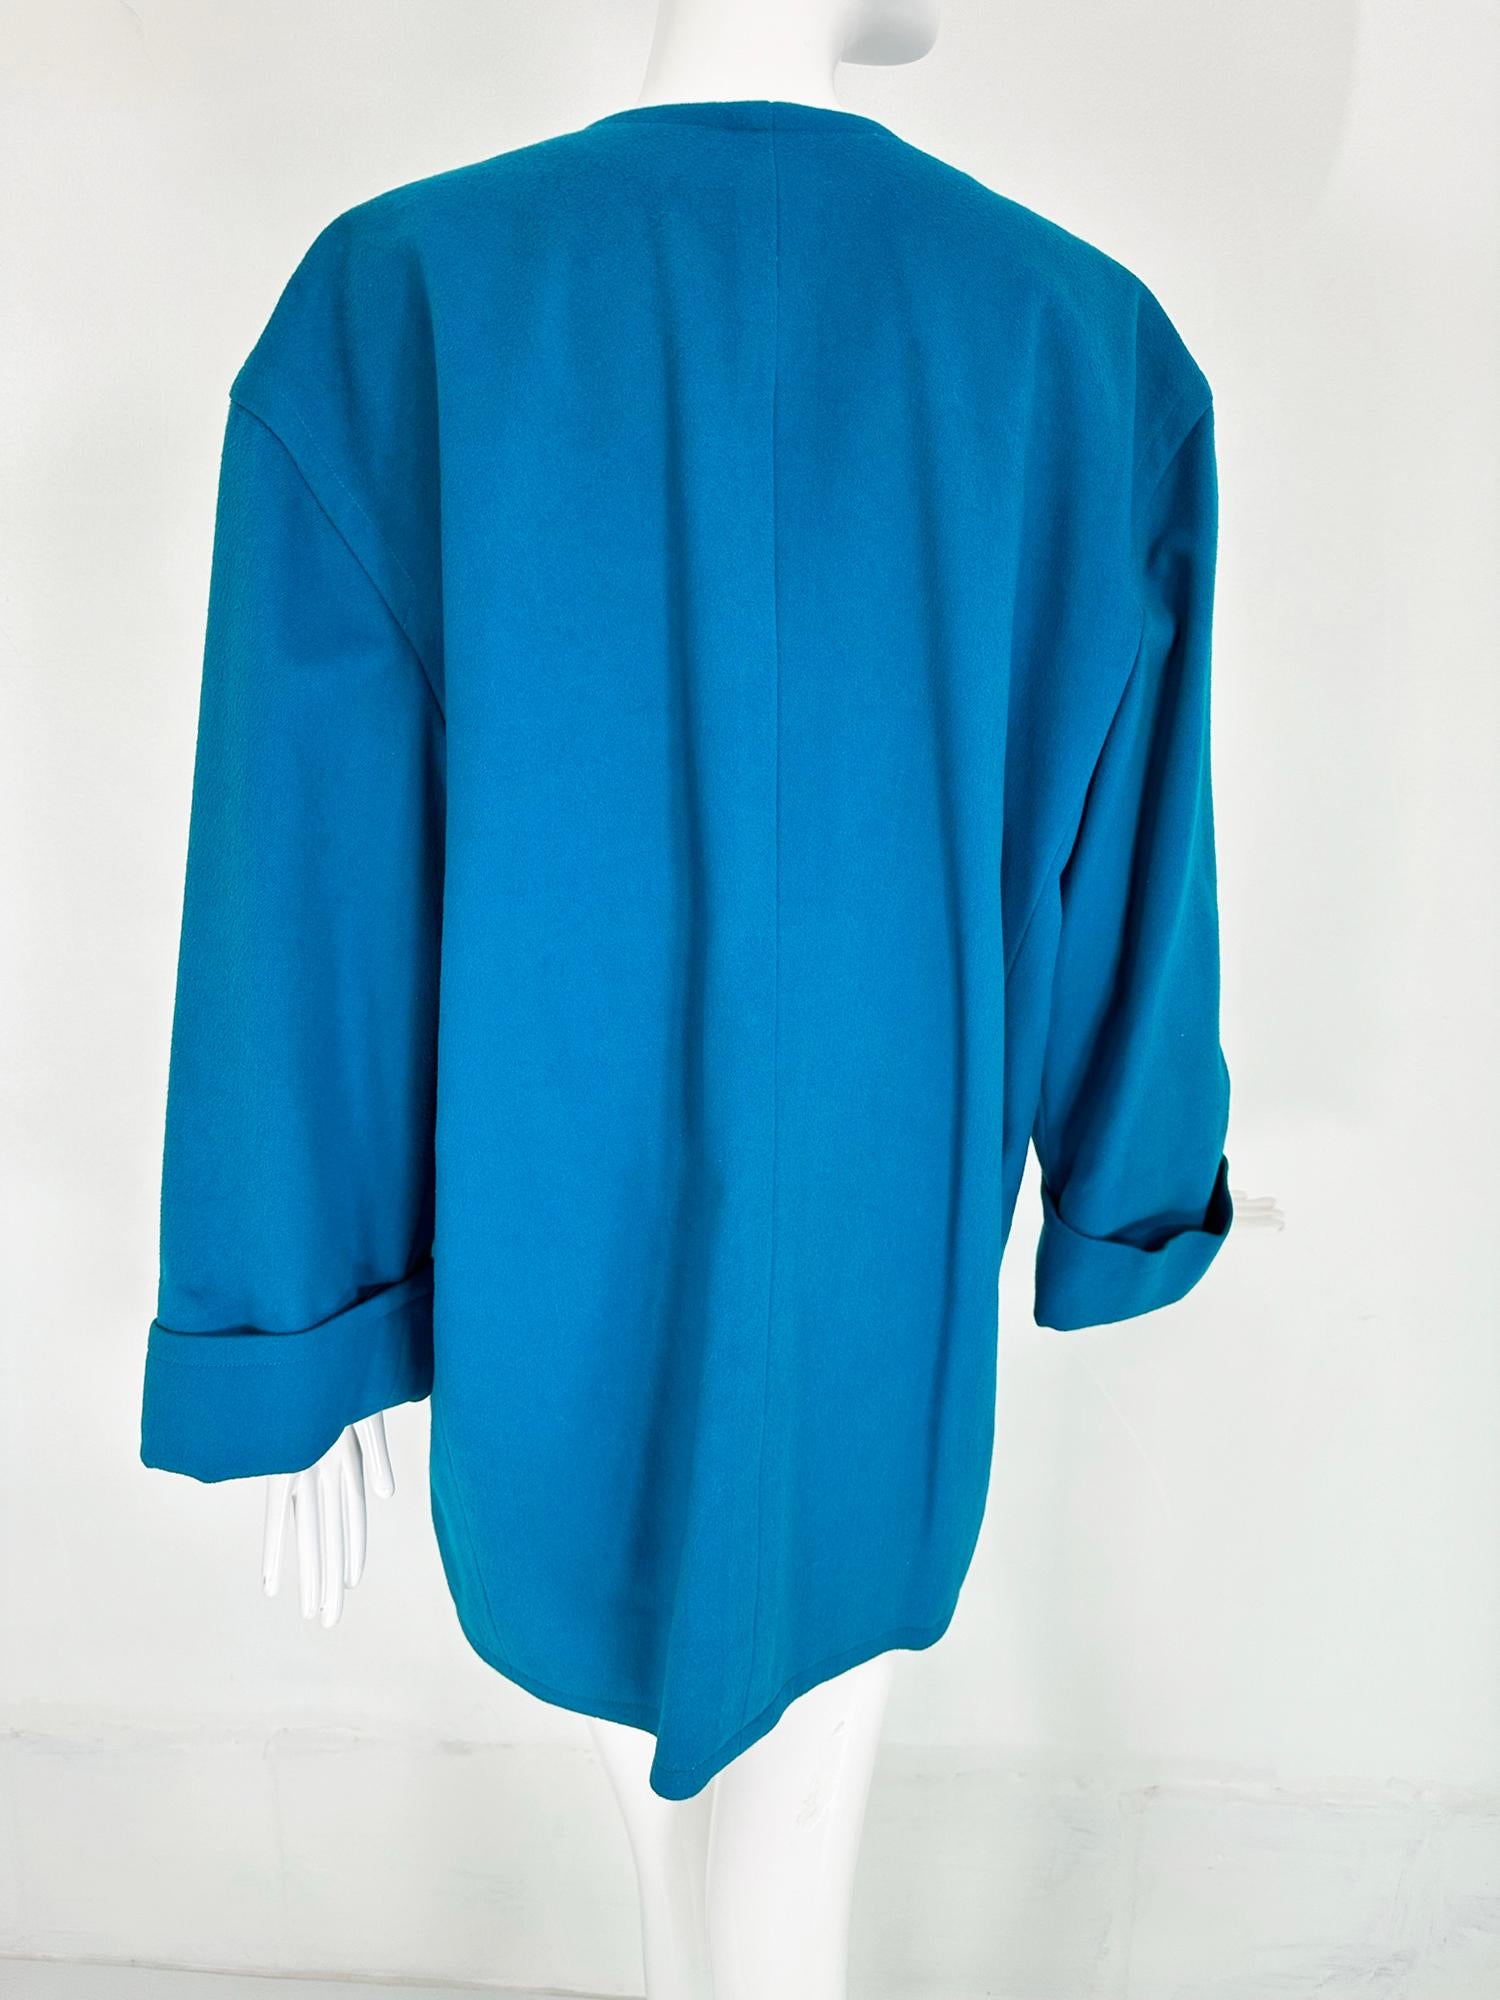 Women's Givenchy Turquoise Wool Open Front Swing Coat with Angled Pockets 1980s For Sale